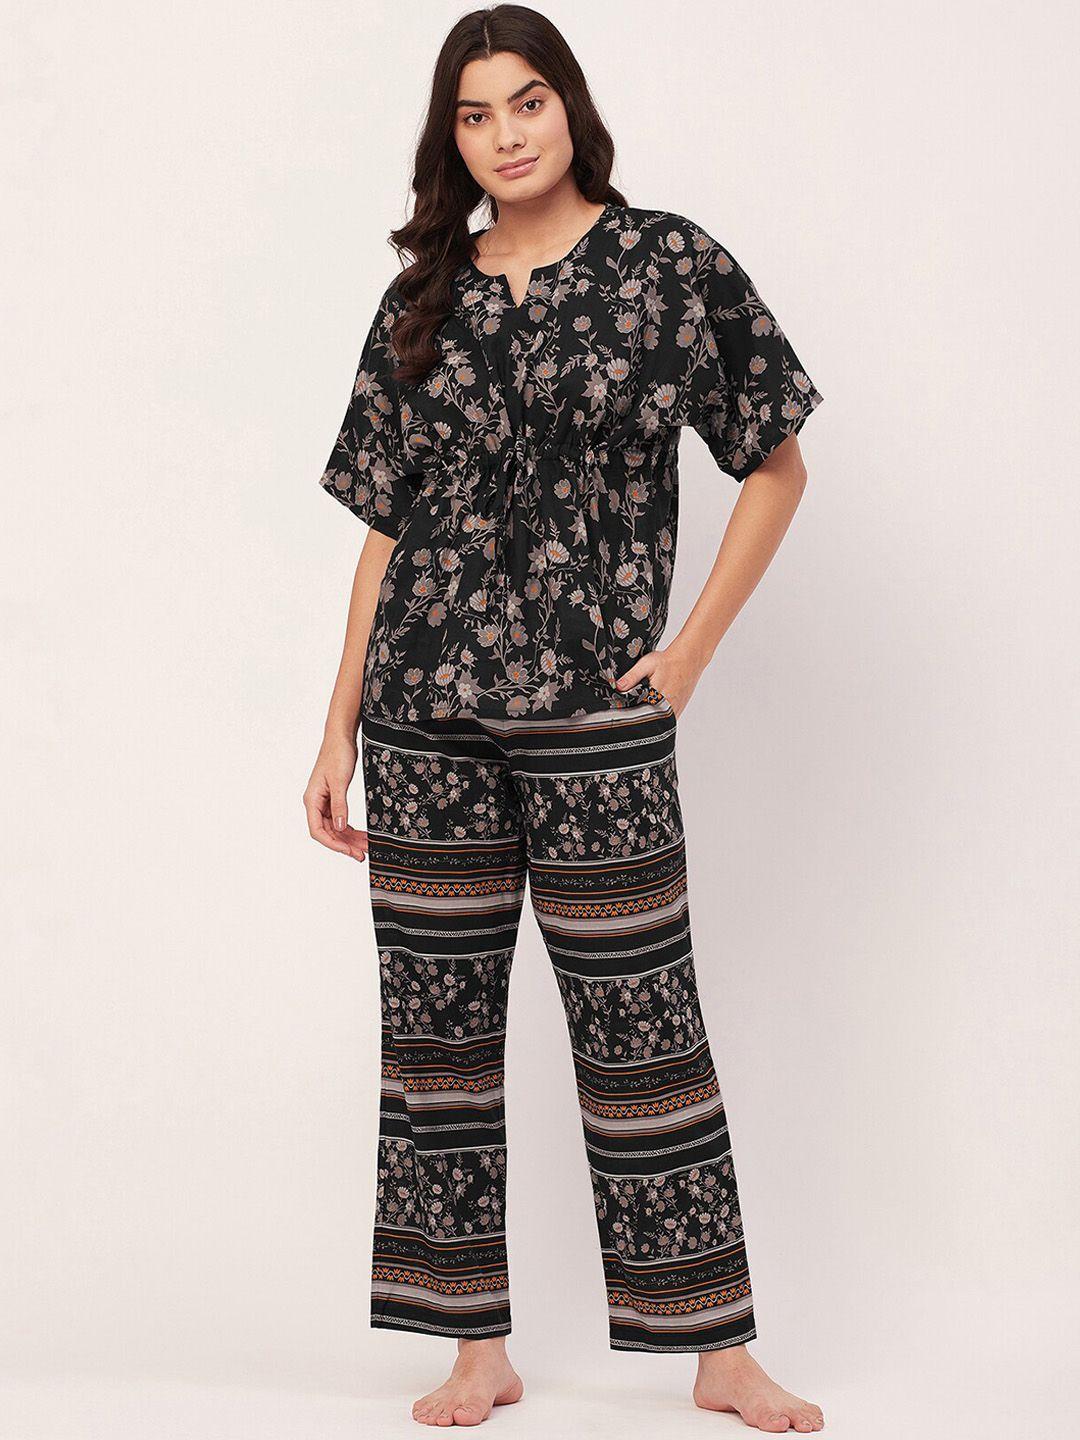 moomaya floral printed notched neck pure cotton top & lounge pants